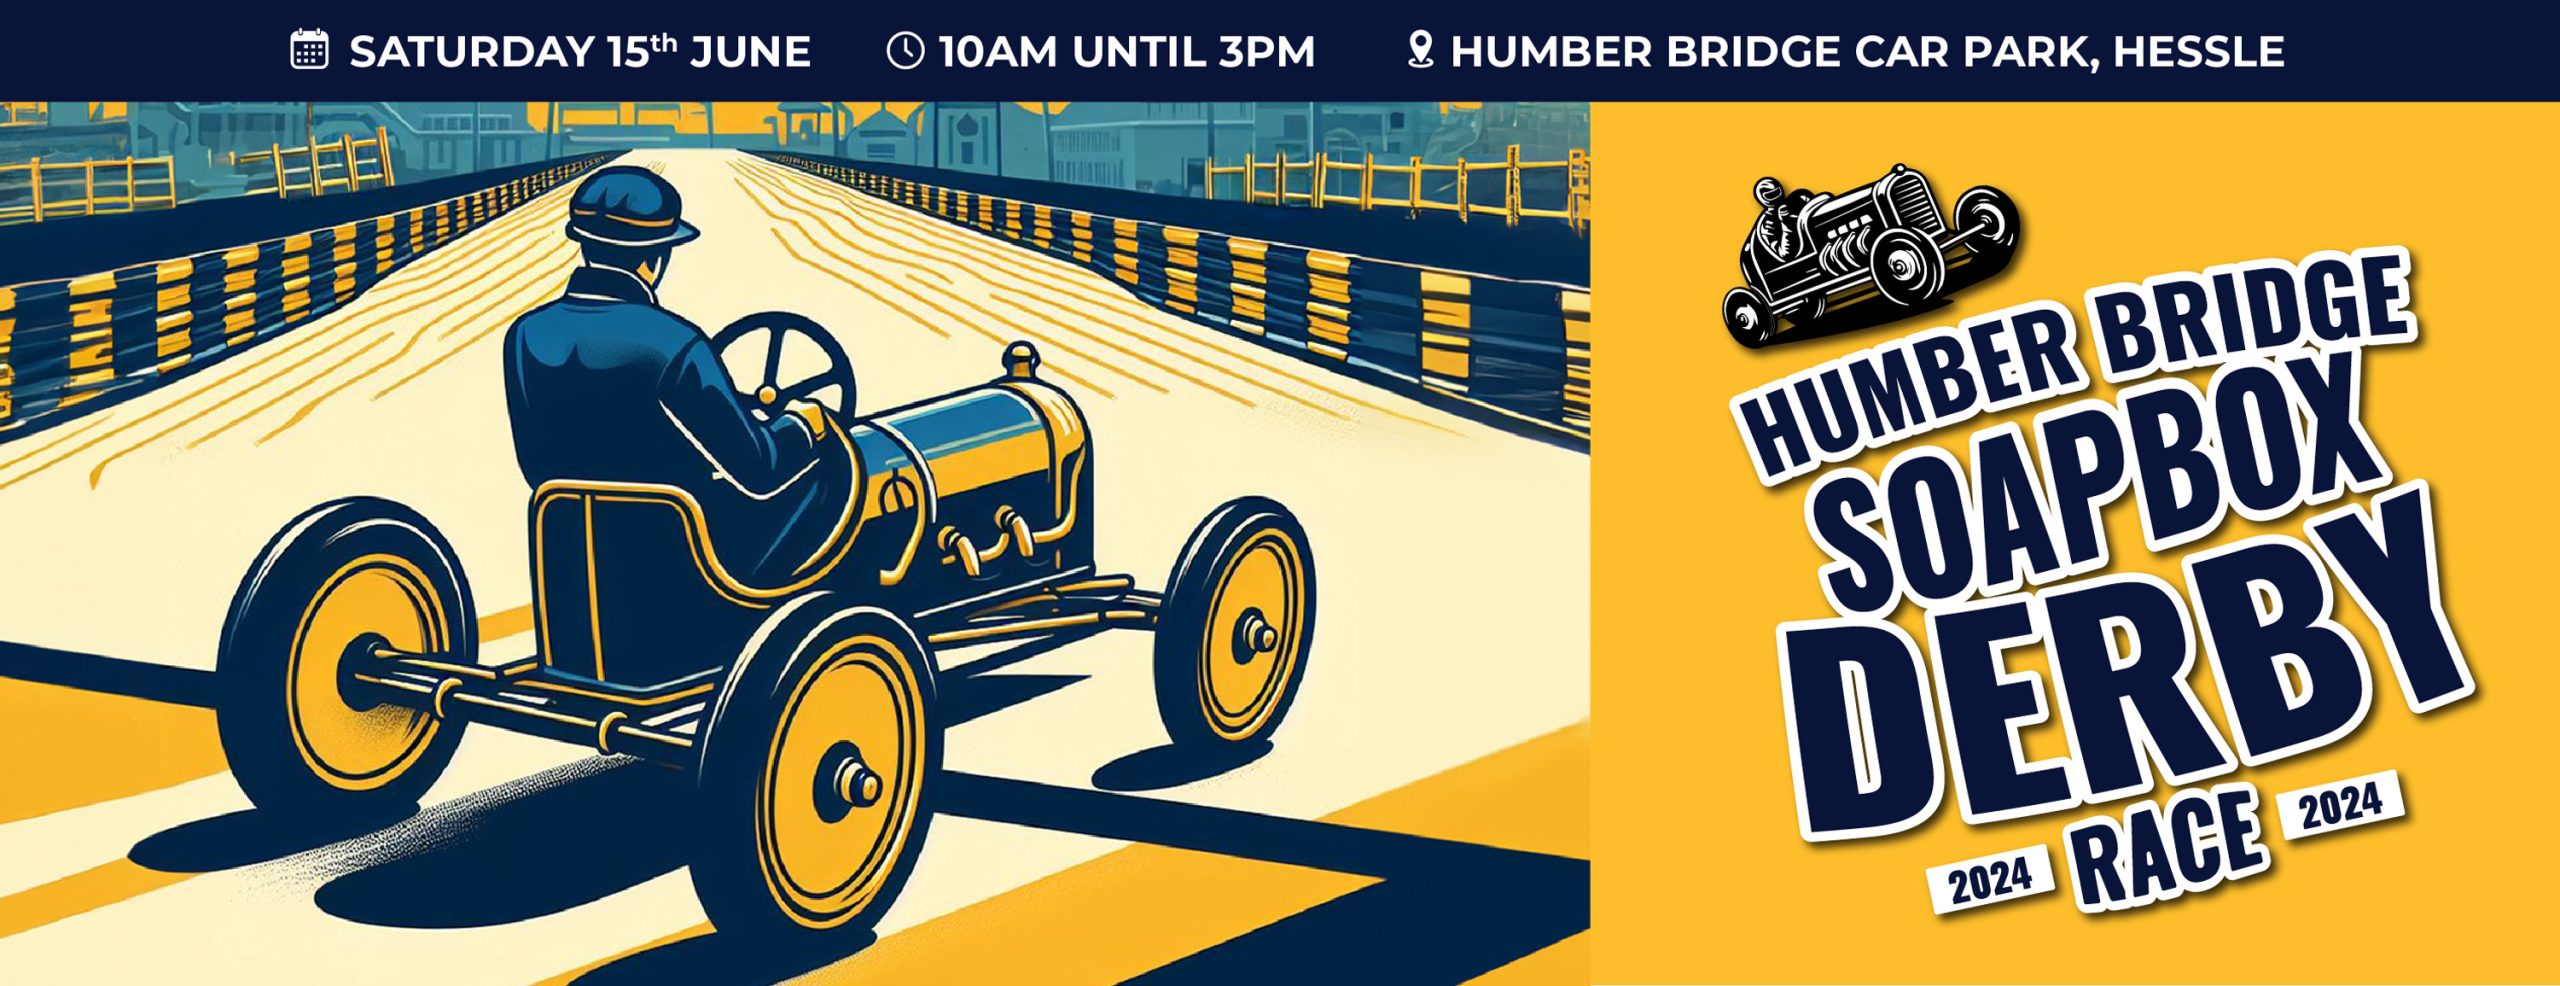 soapbox_derby_front_page_banner_001